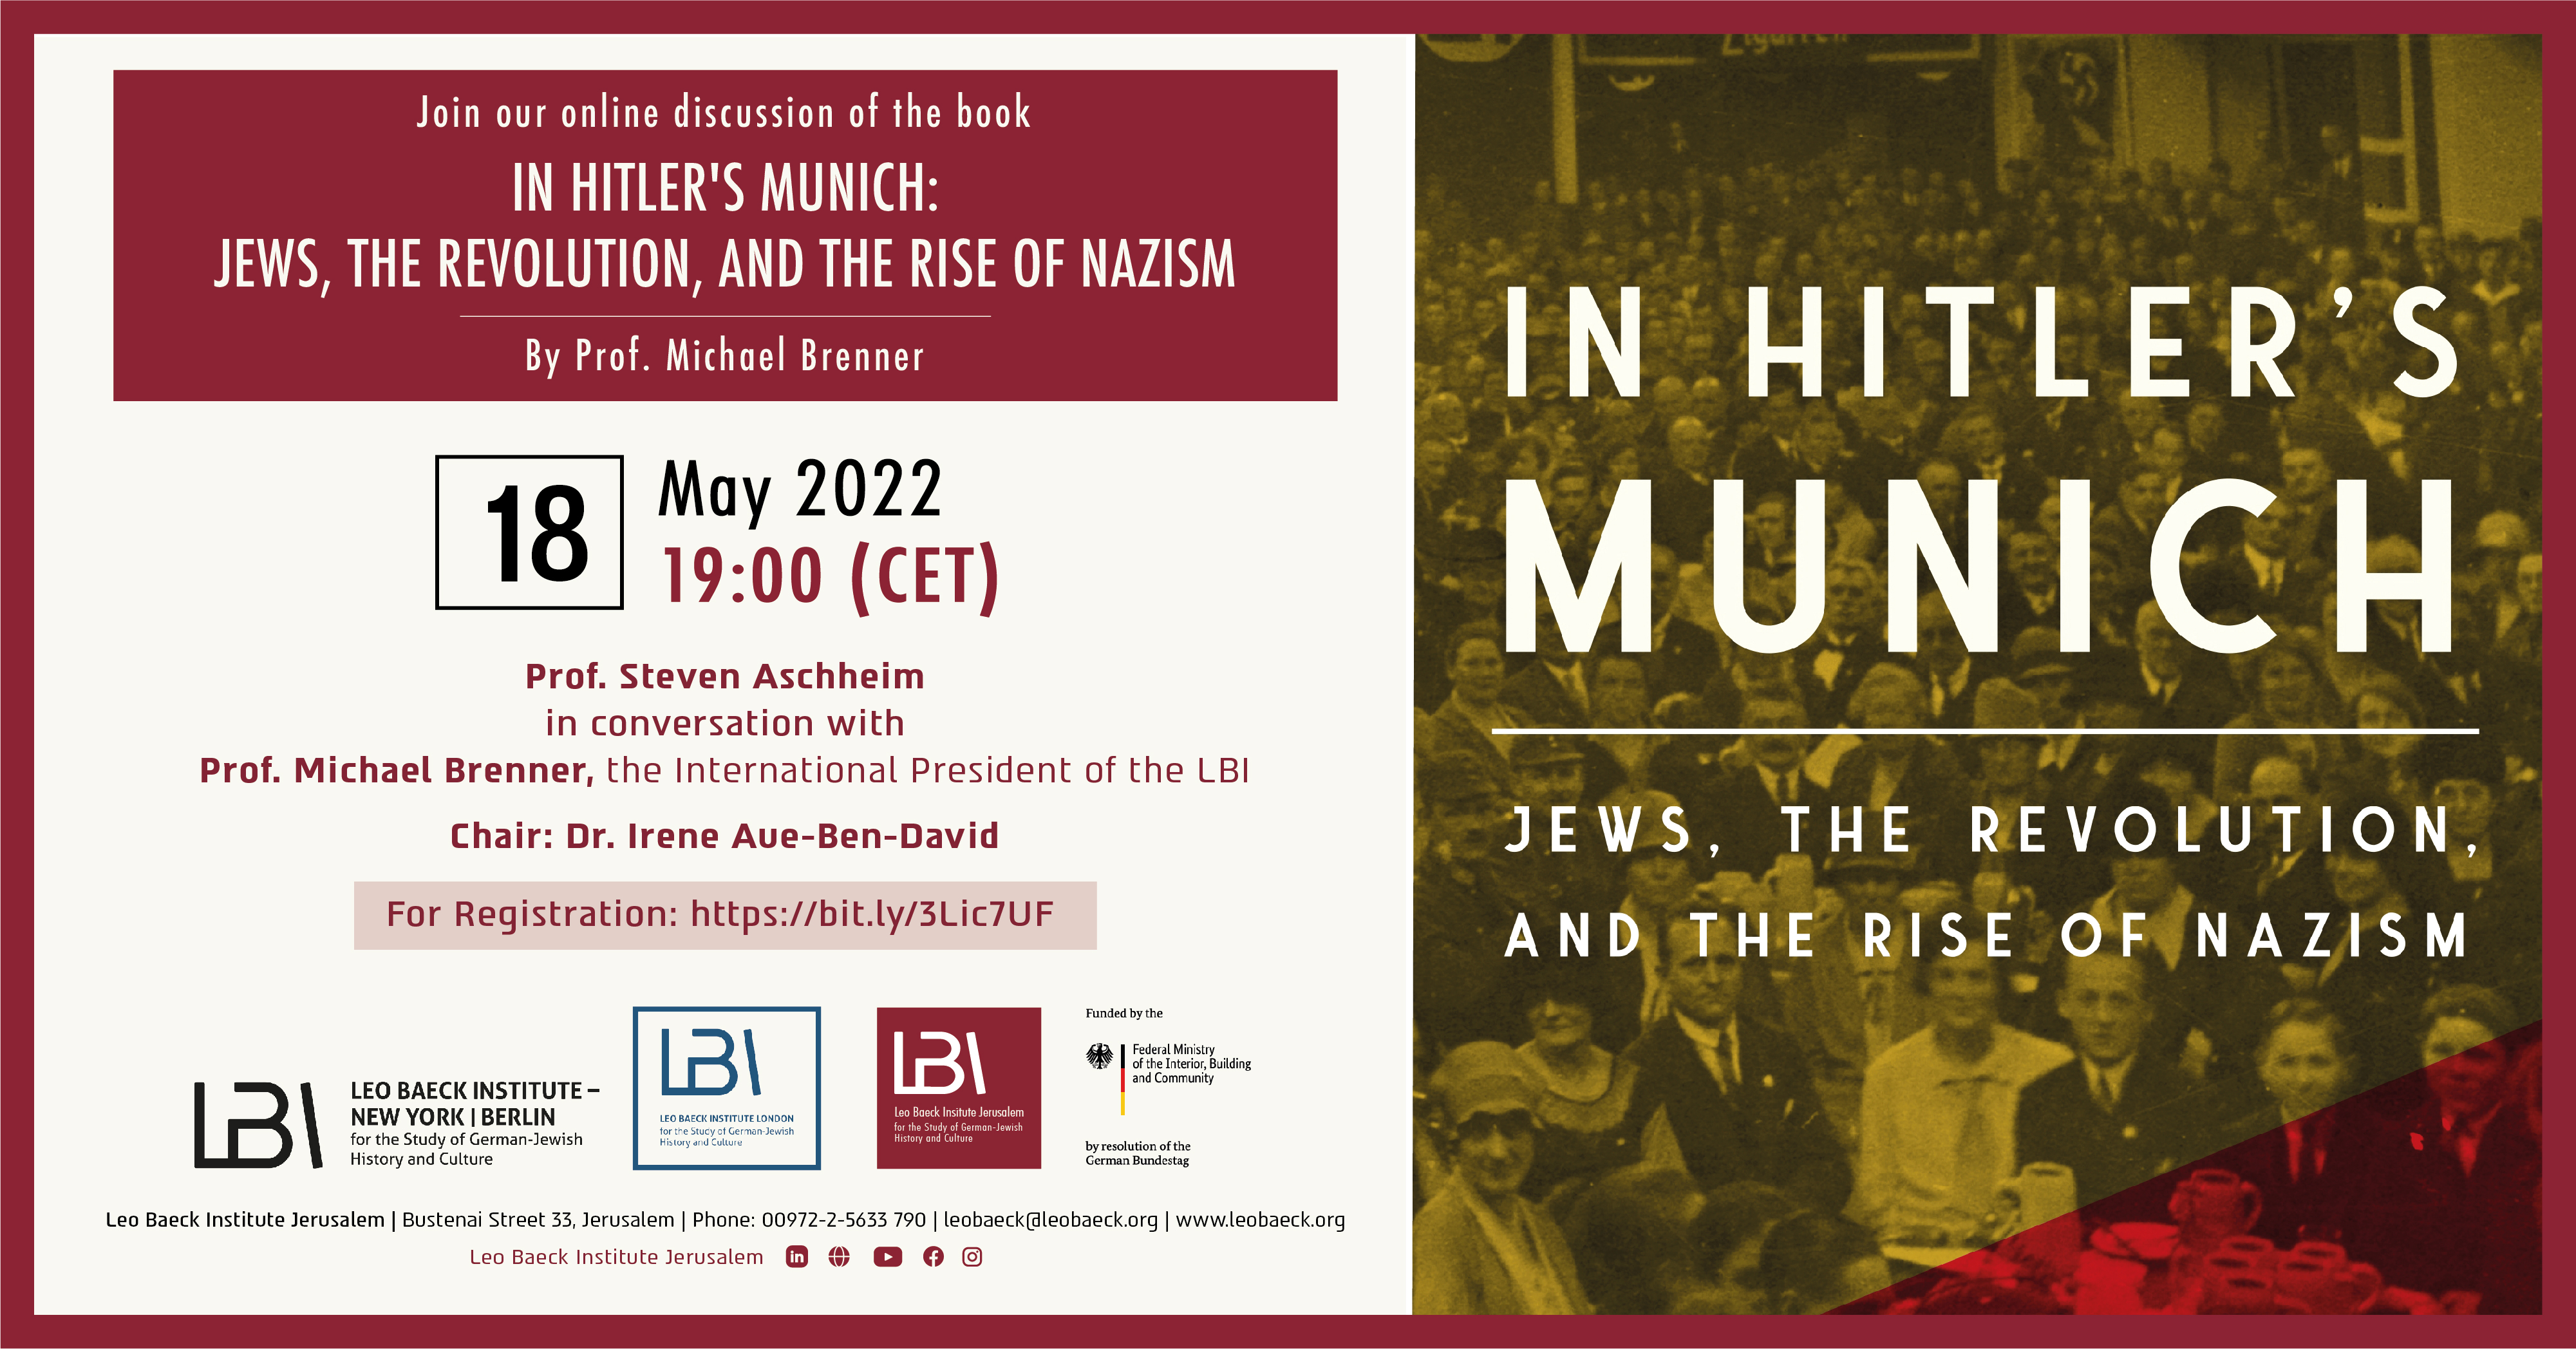 Online discussion of the book 'In Hitler's Munich: Jews, the Revolution and the Rise of Nazism'